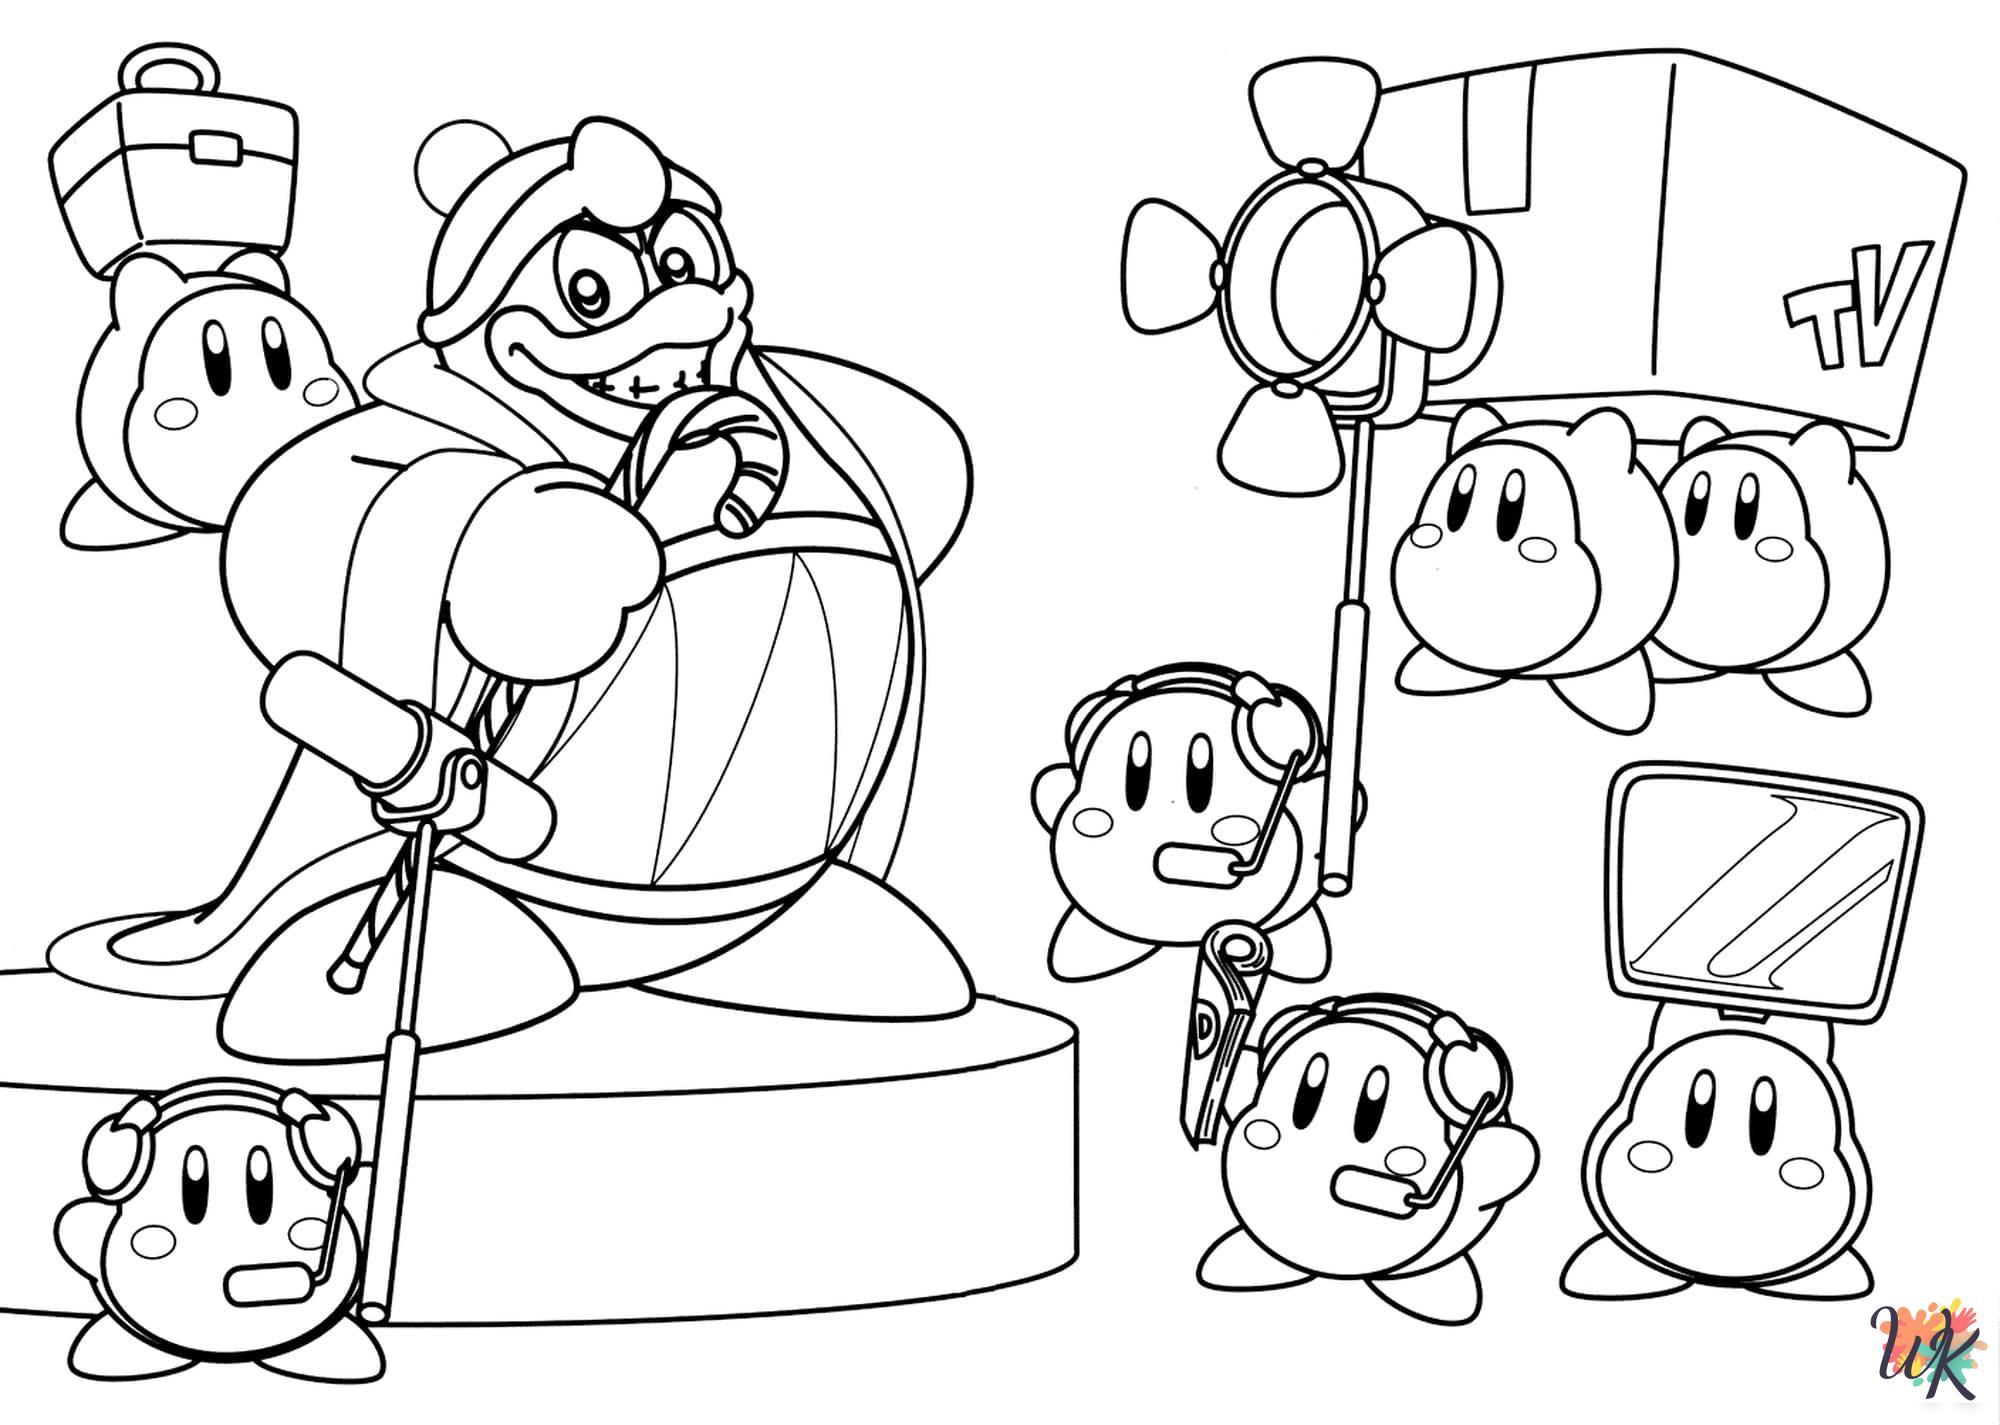 Kirby themed coloring pages